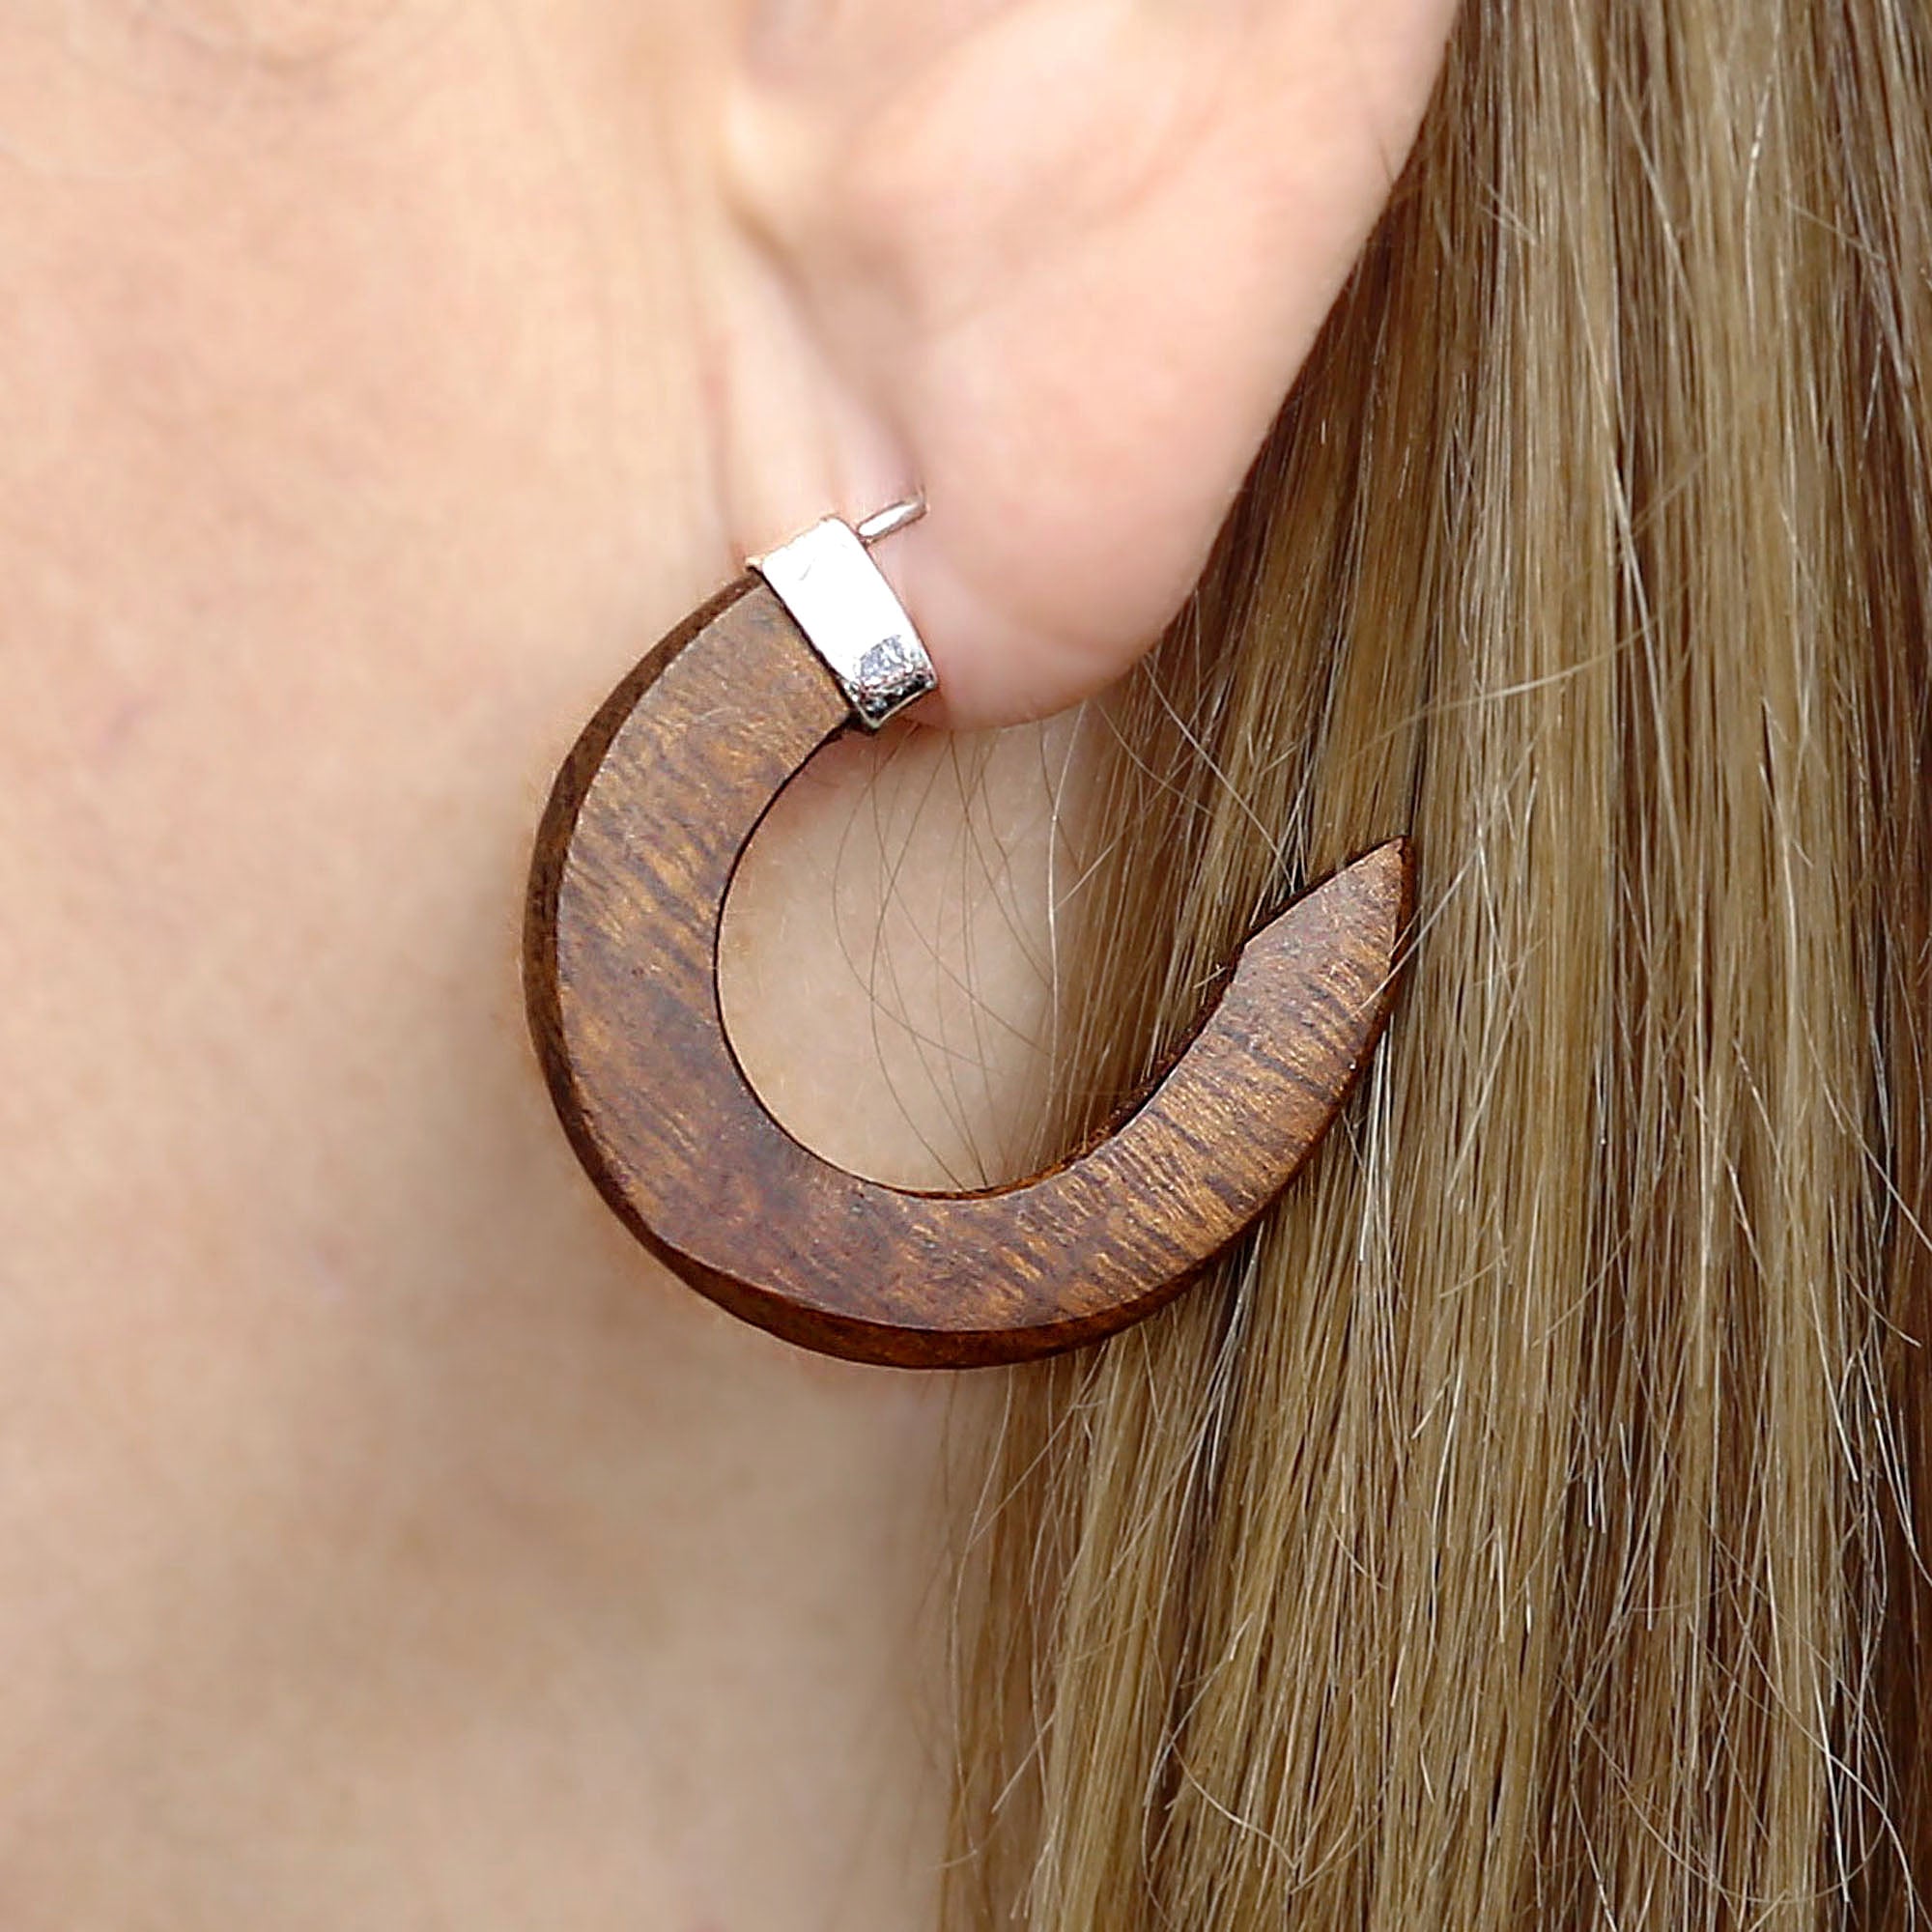 Silver wood earrings, Wooden jewelry hoops with 925 sterling silver, Boho and ethnic ironwood  earrings silversmith made, ebony hoop earring